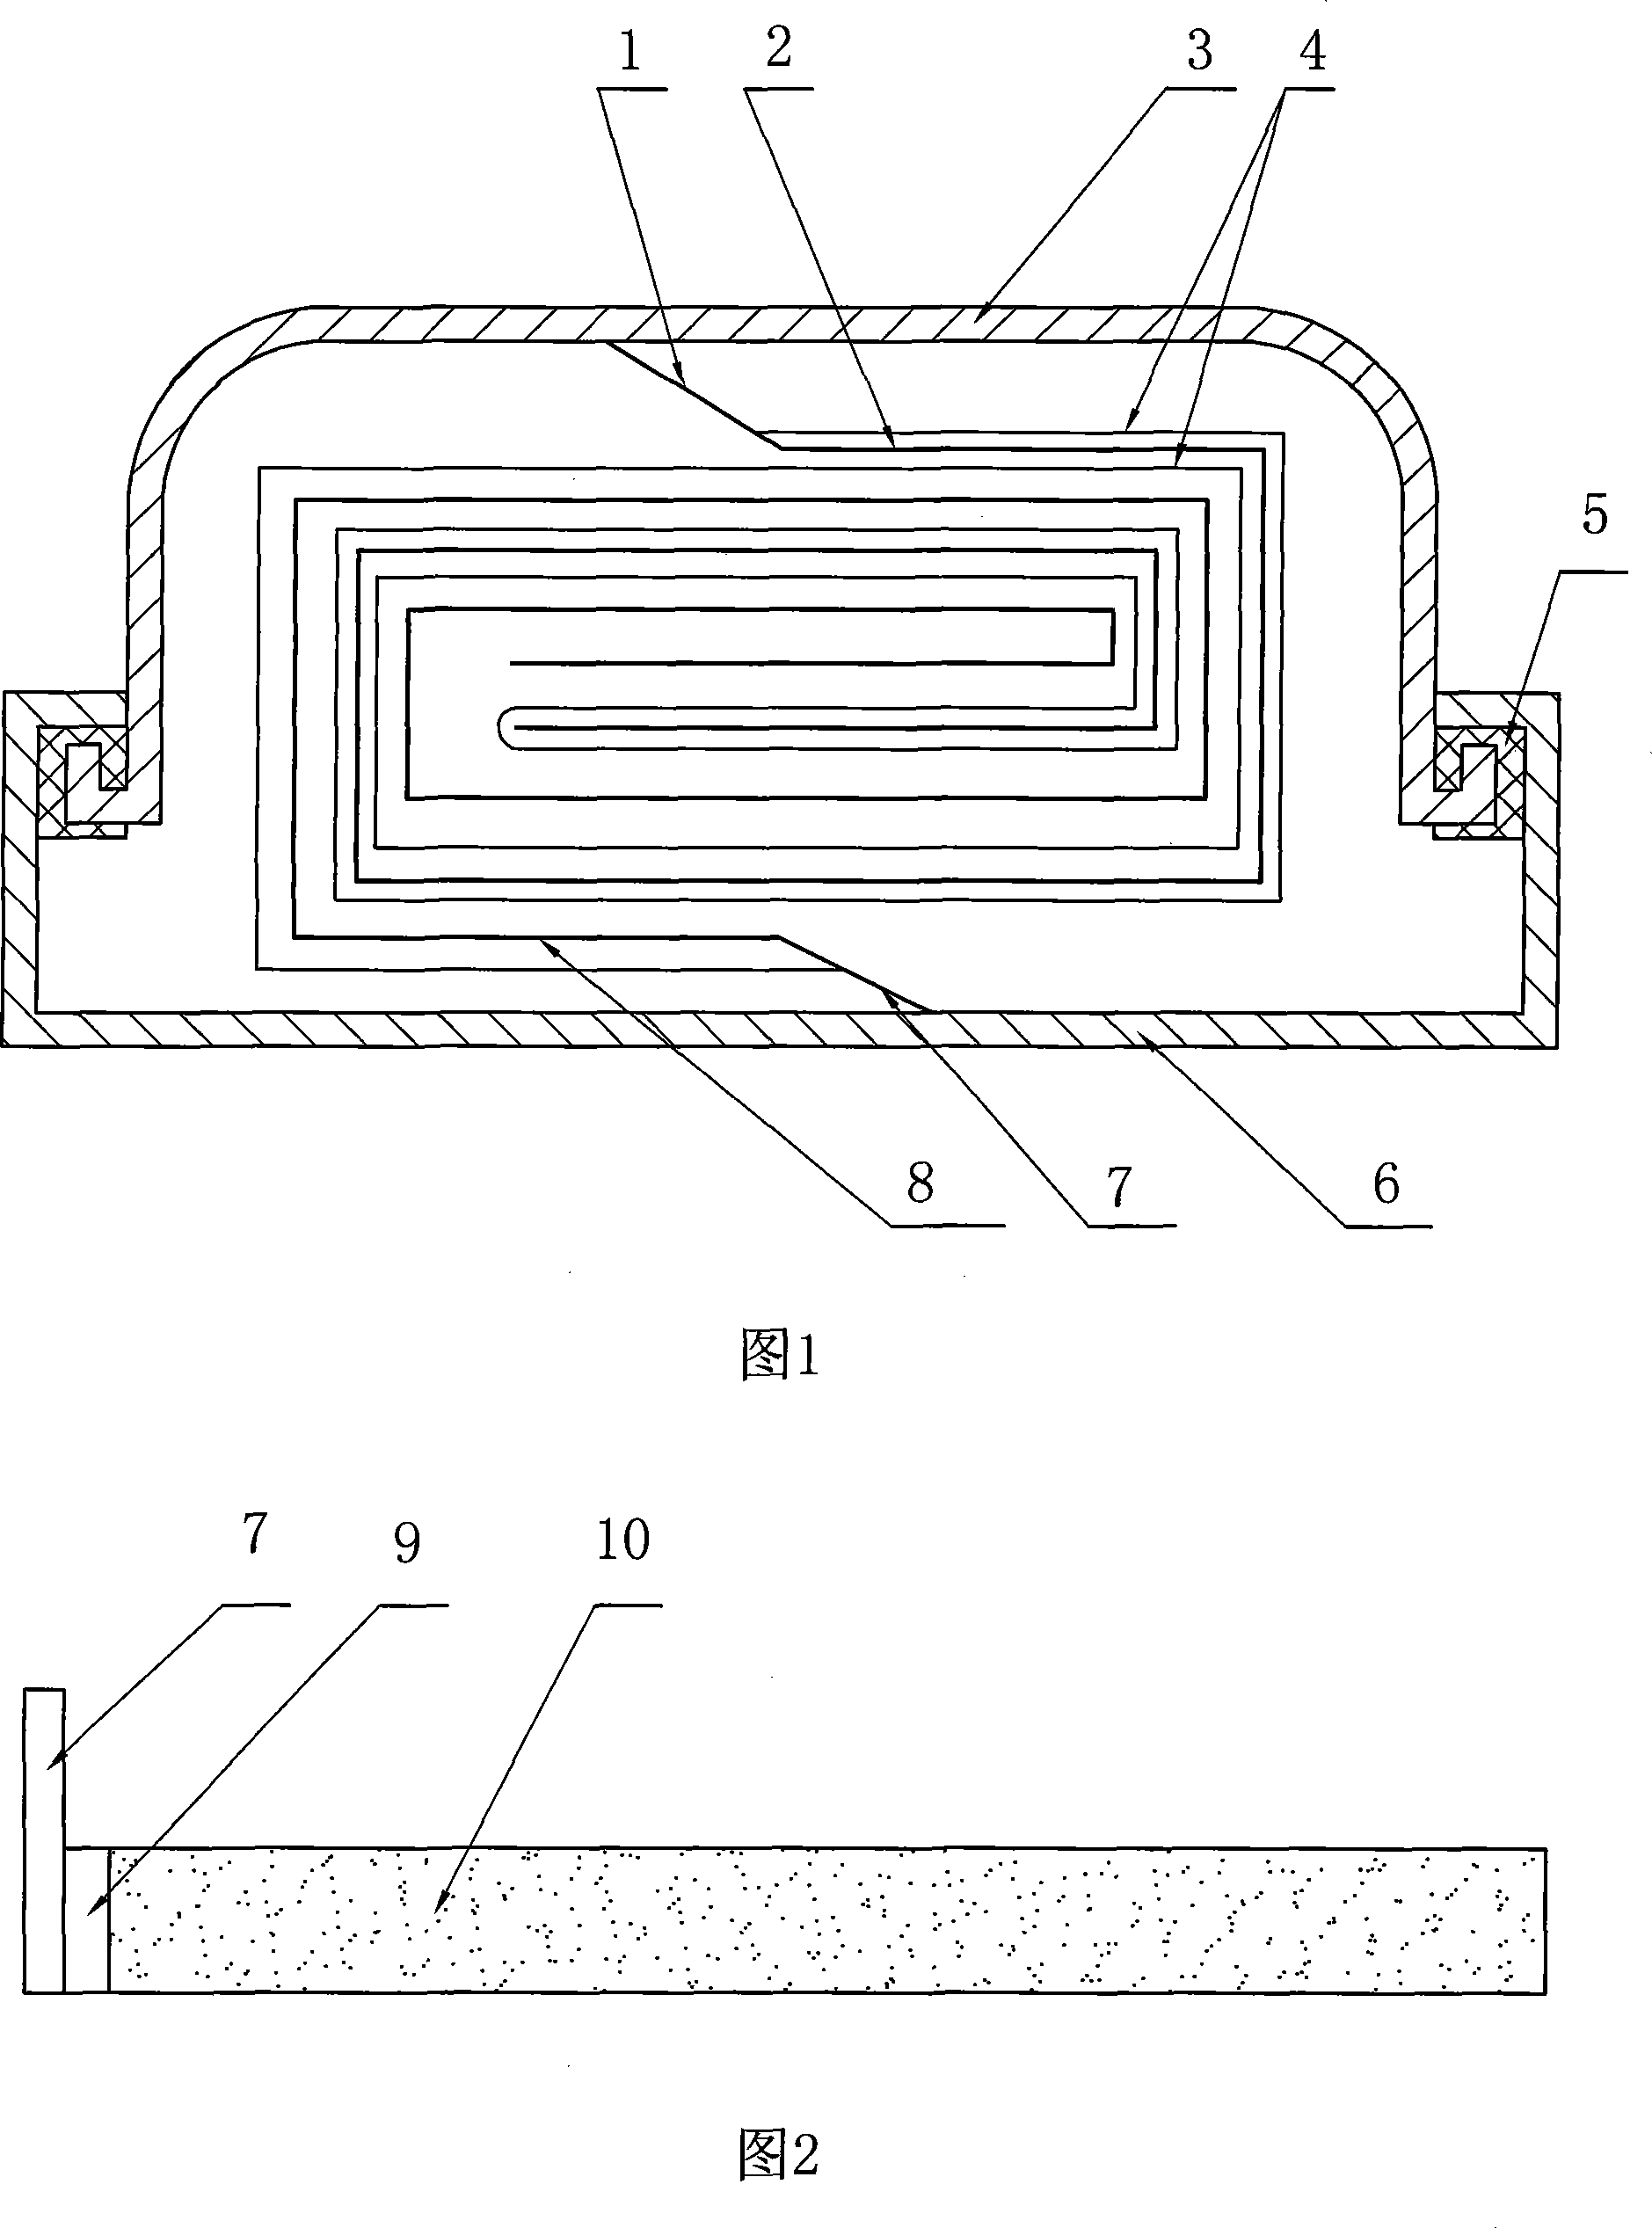 Buckle type electrochemical capacitor and its manufacture method